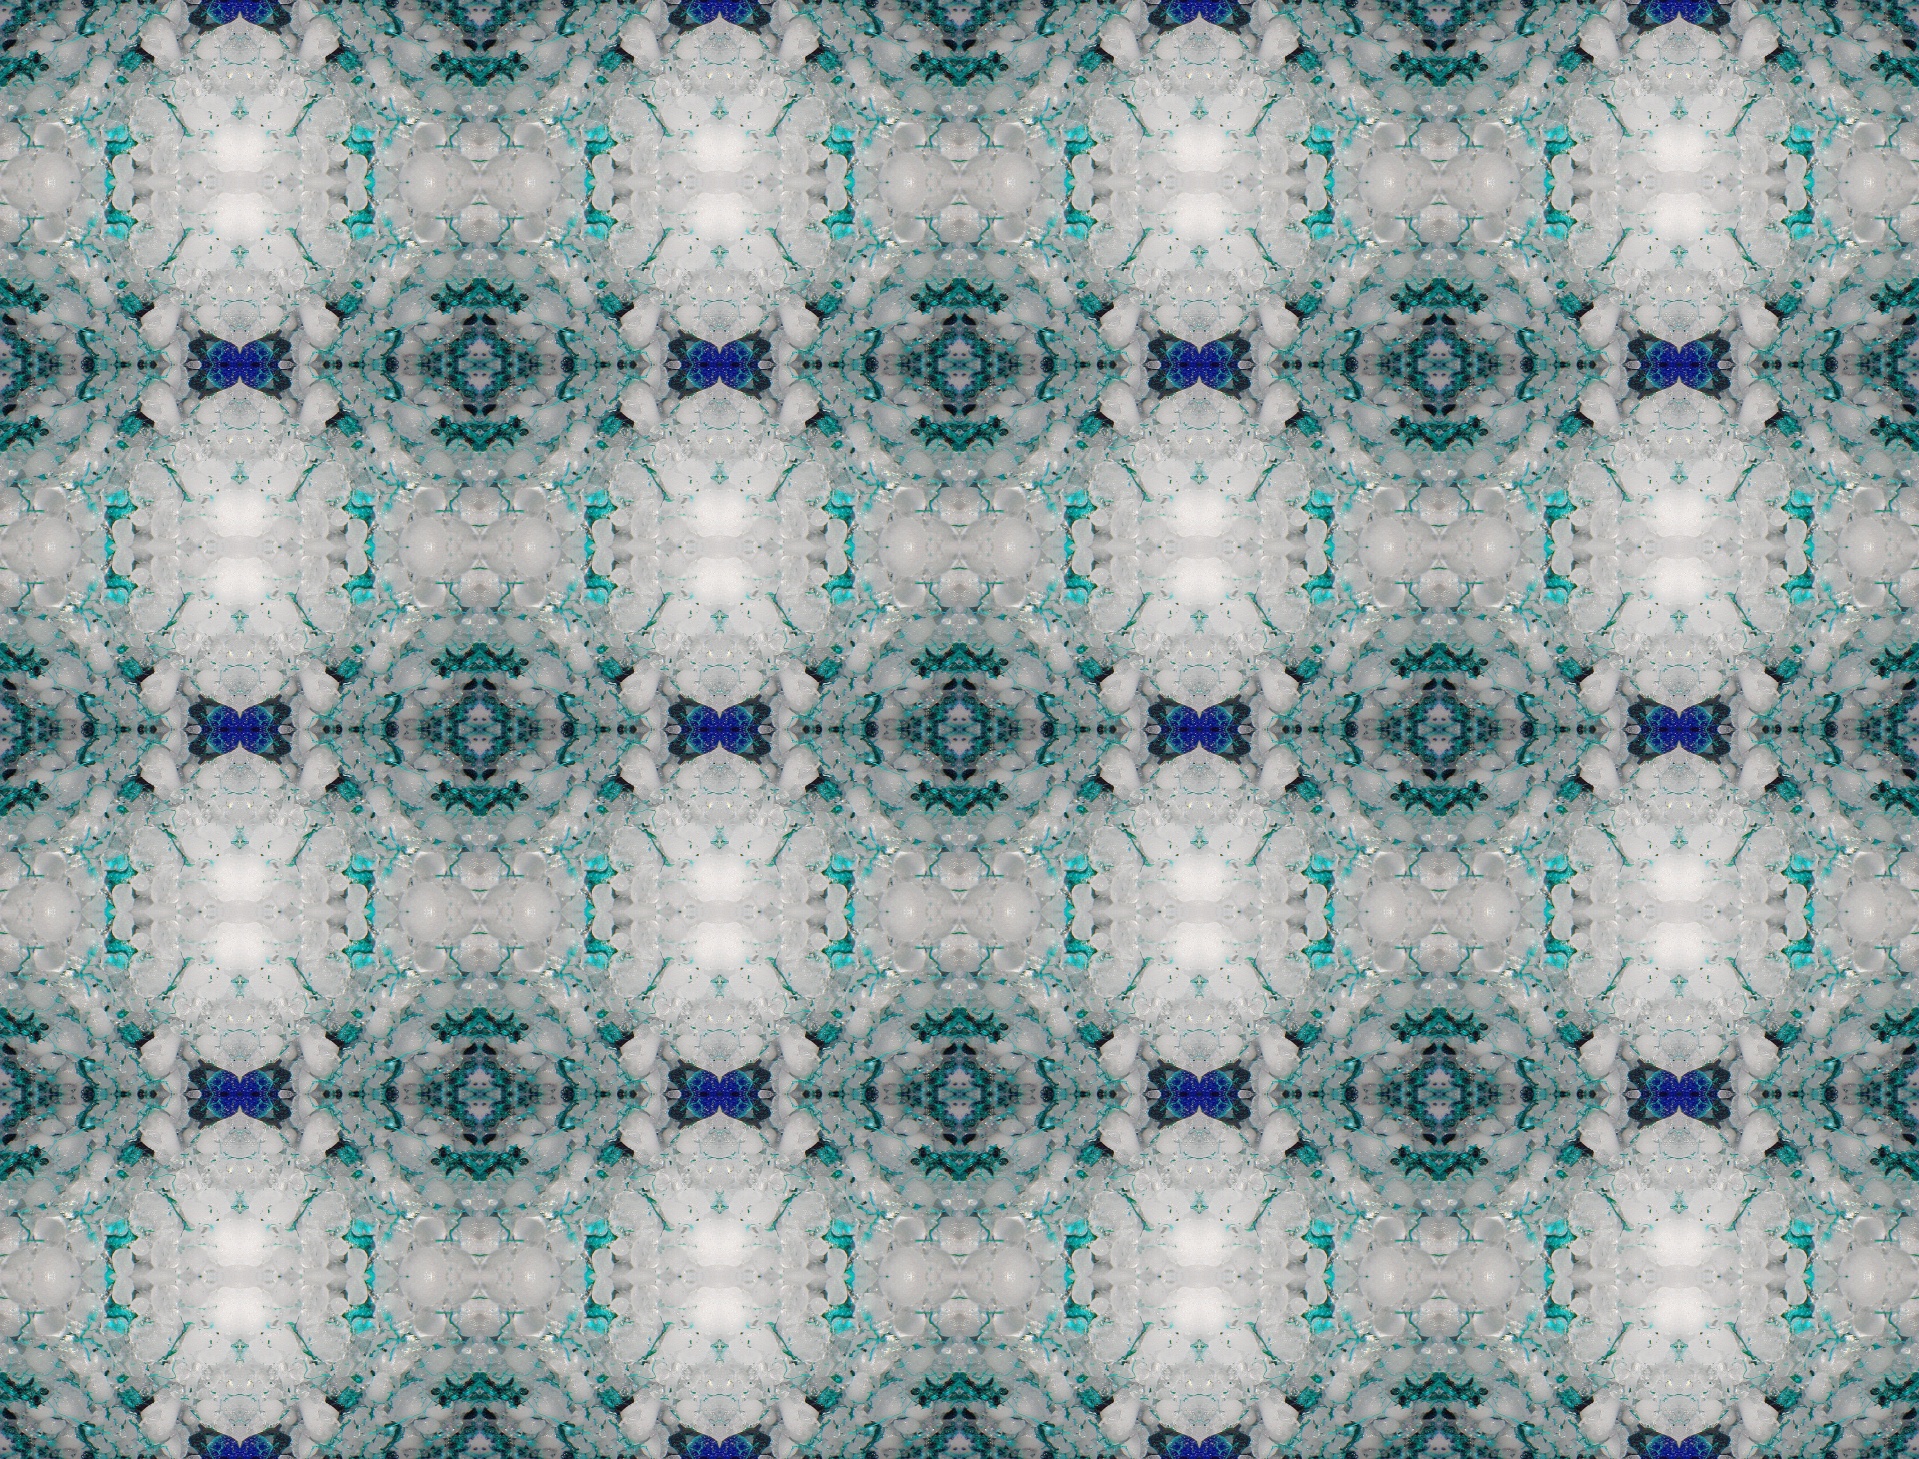 pattern,repeat,white,blue,decorative,wallpaper,background,hailstone pattern,free pictures, free photos, free images, royalty free, free illustrations, public domain